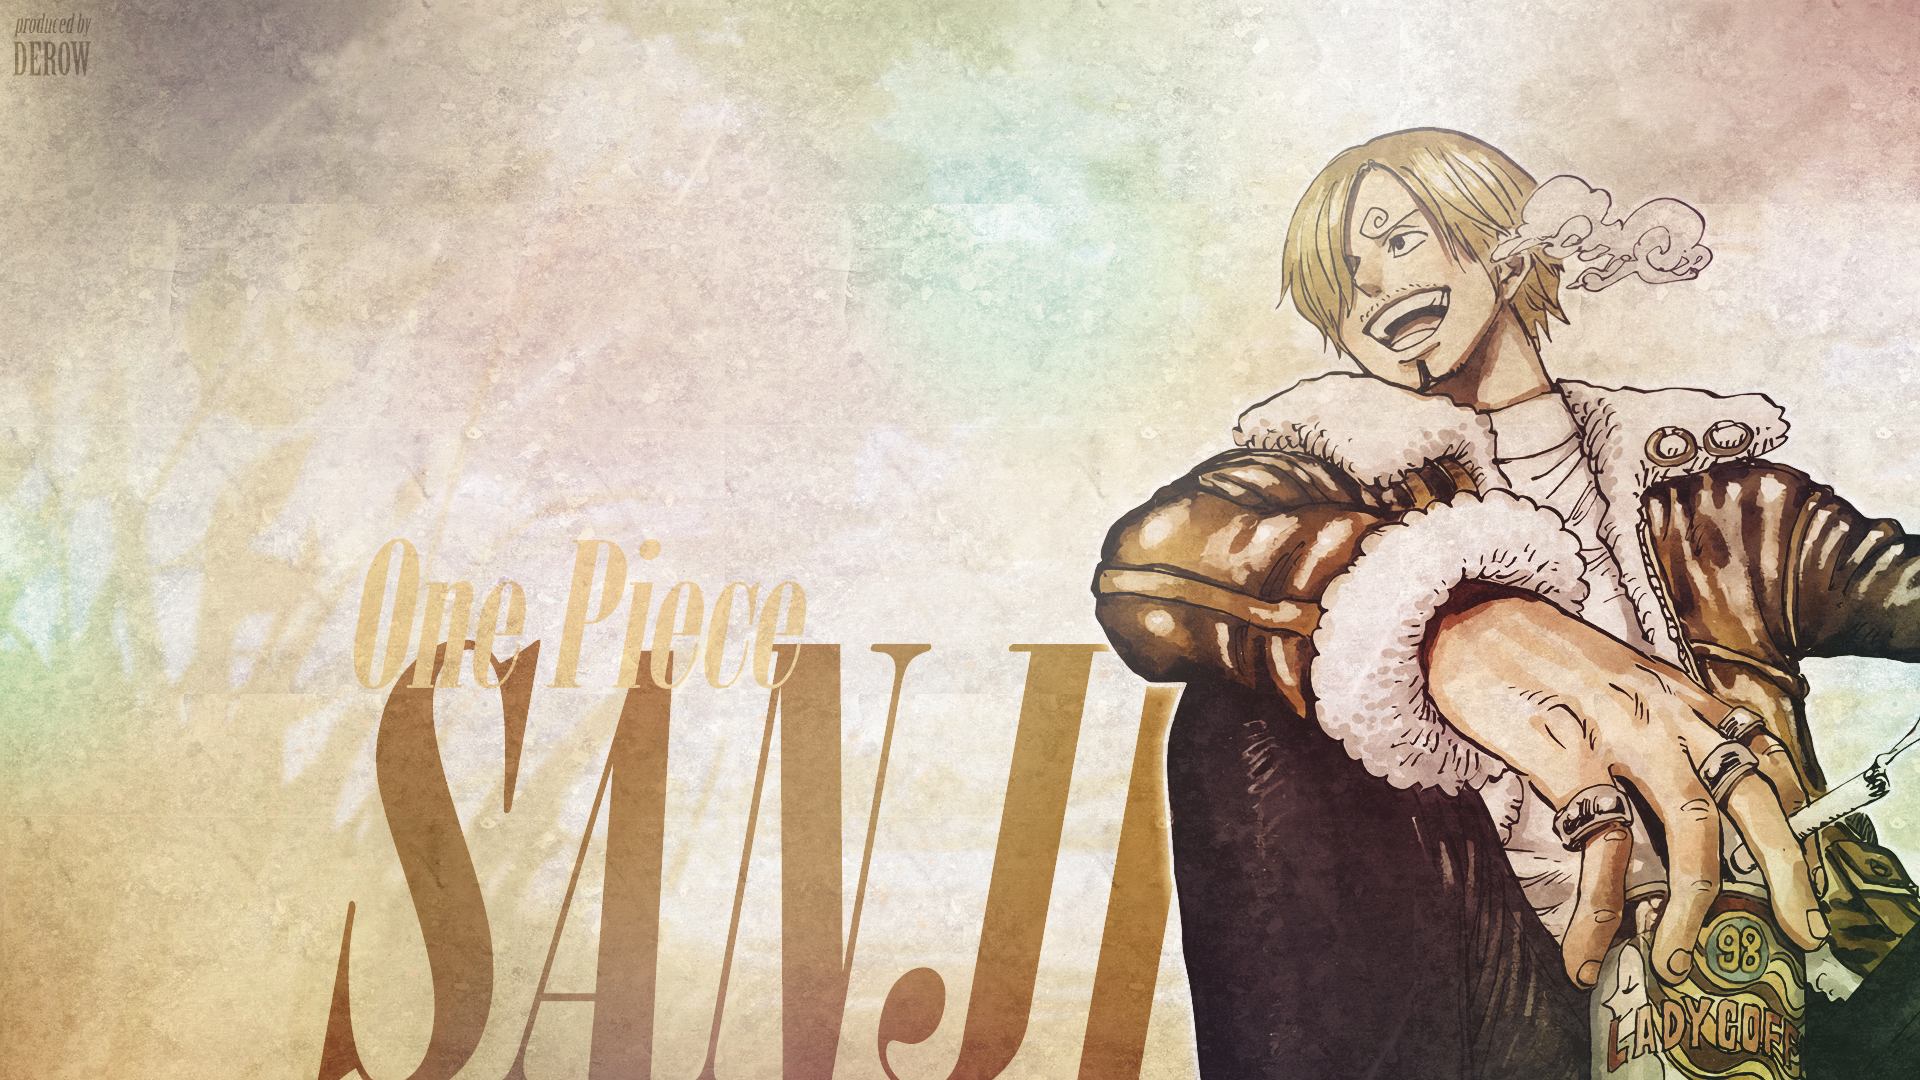  One  Piece  HD Wallpaper  Background Image 1920x1080 ID 